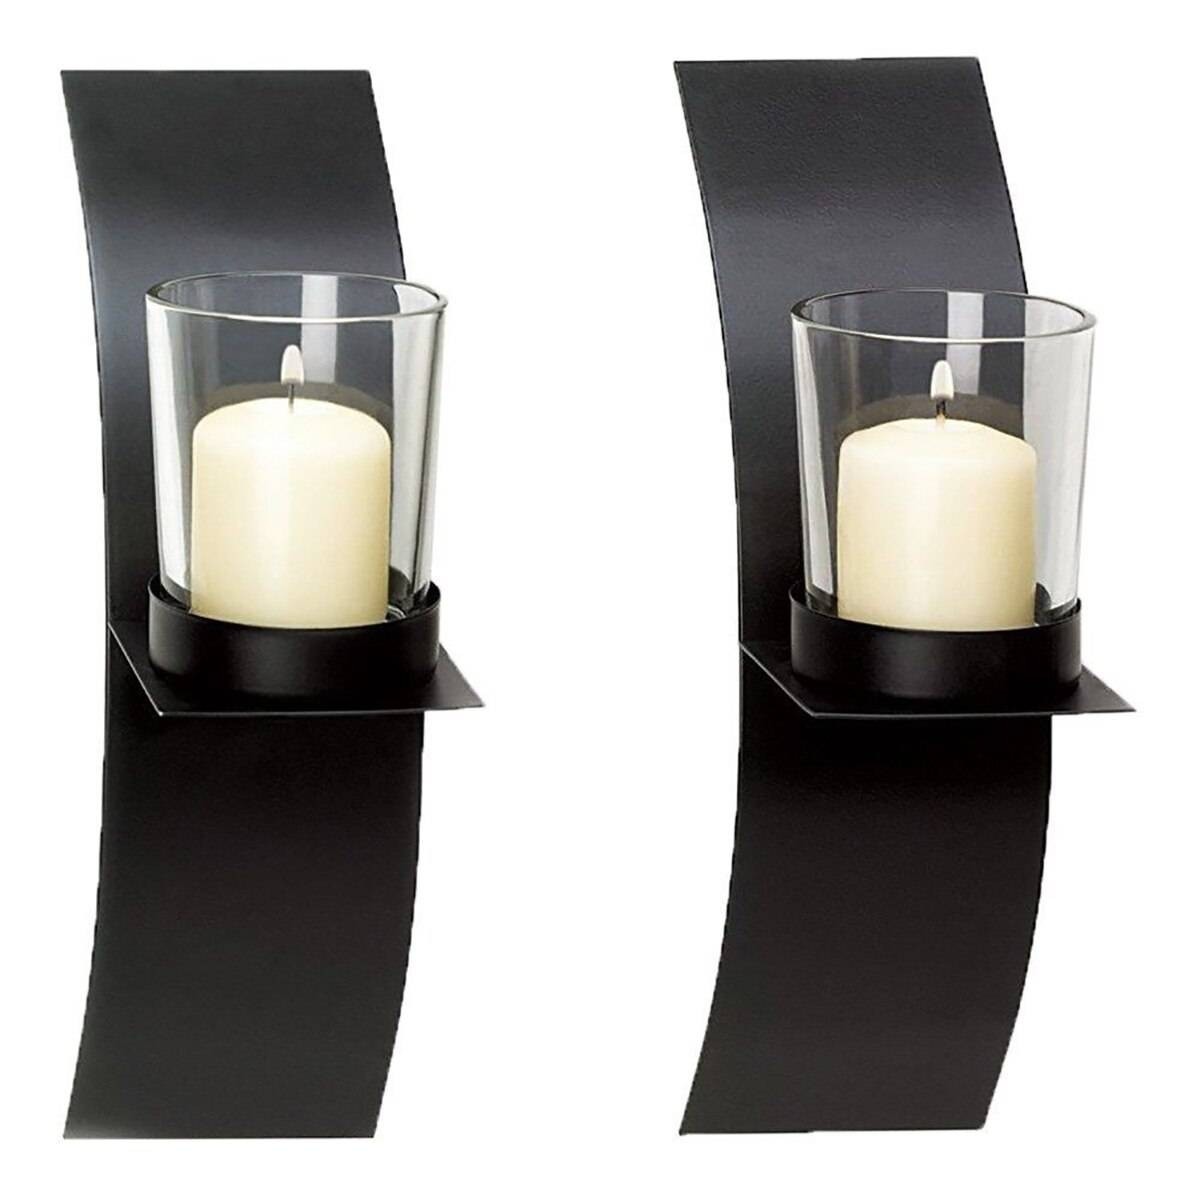 Beautiful wall mount sconce and large pillar candle holders sets